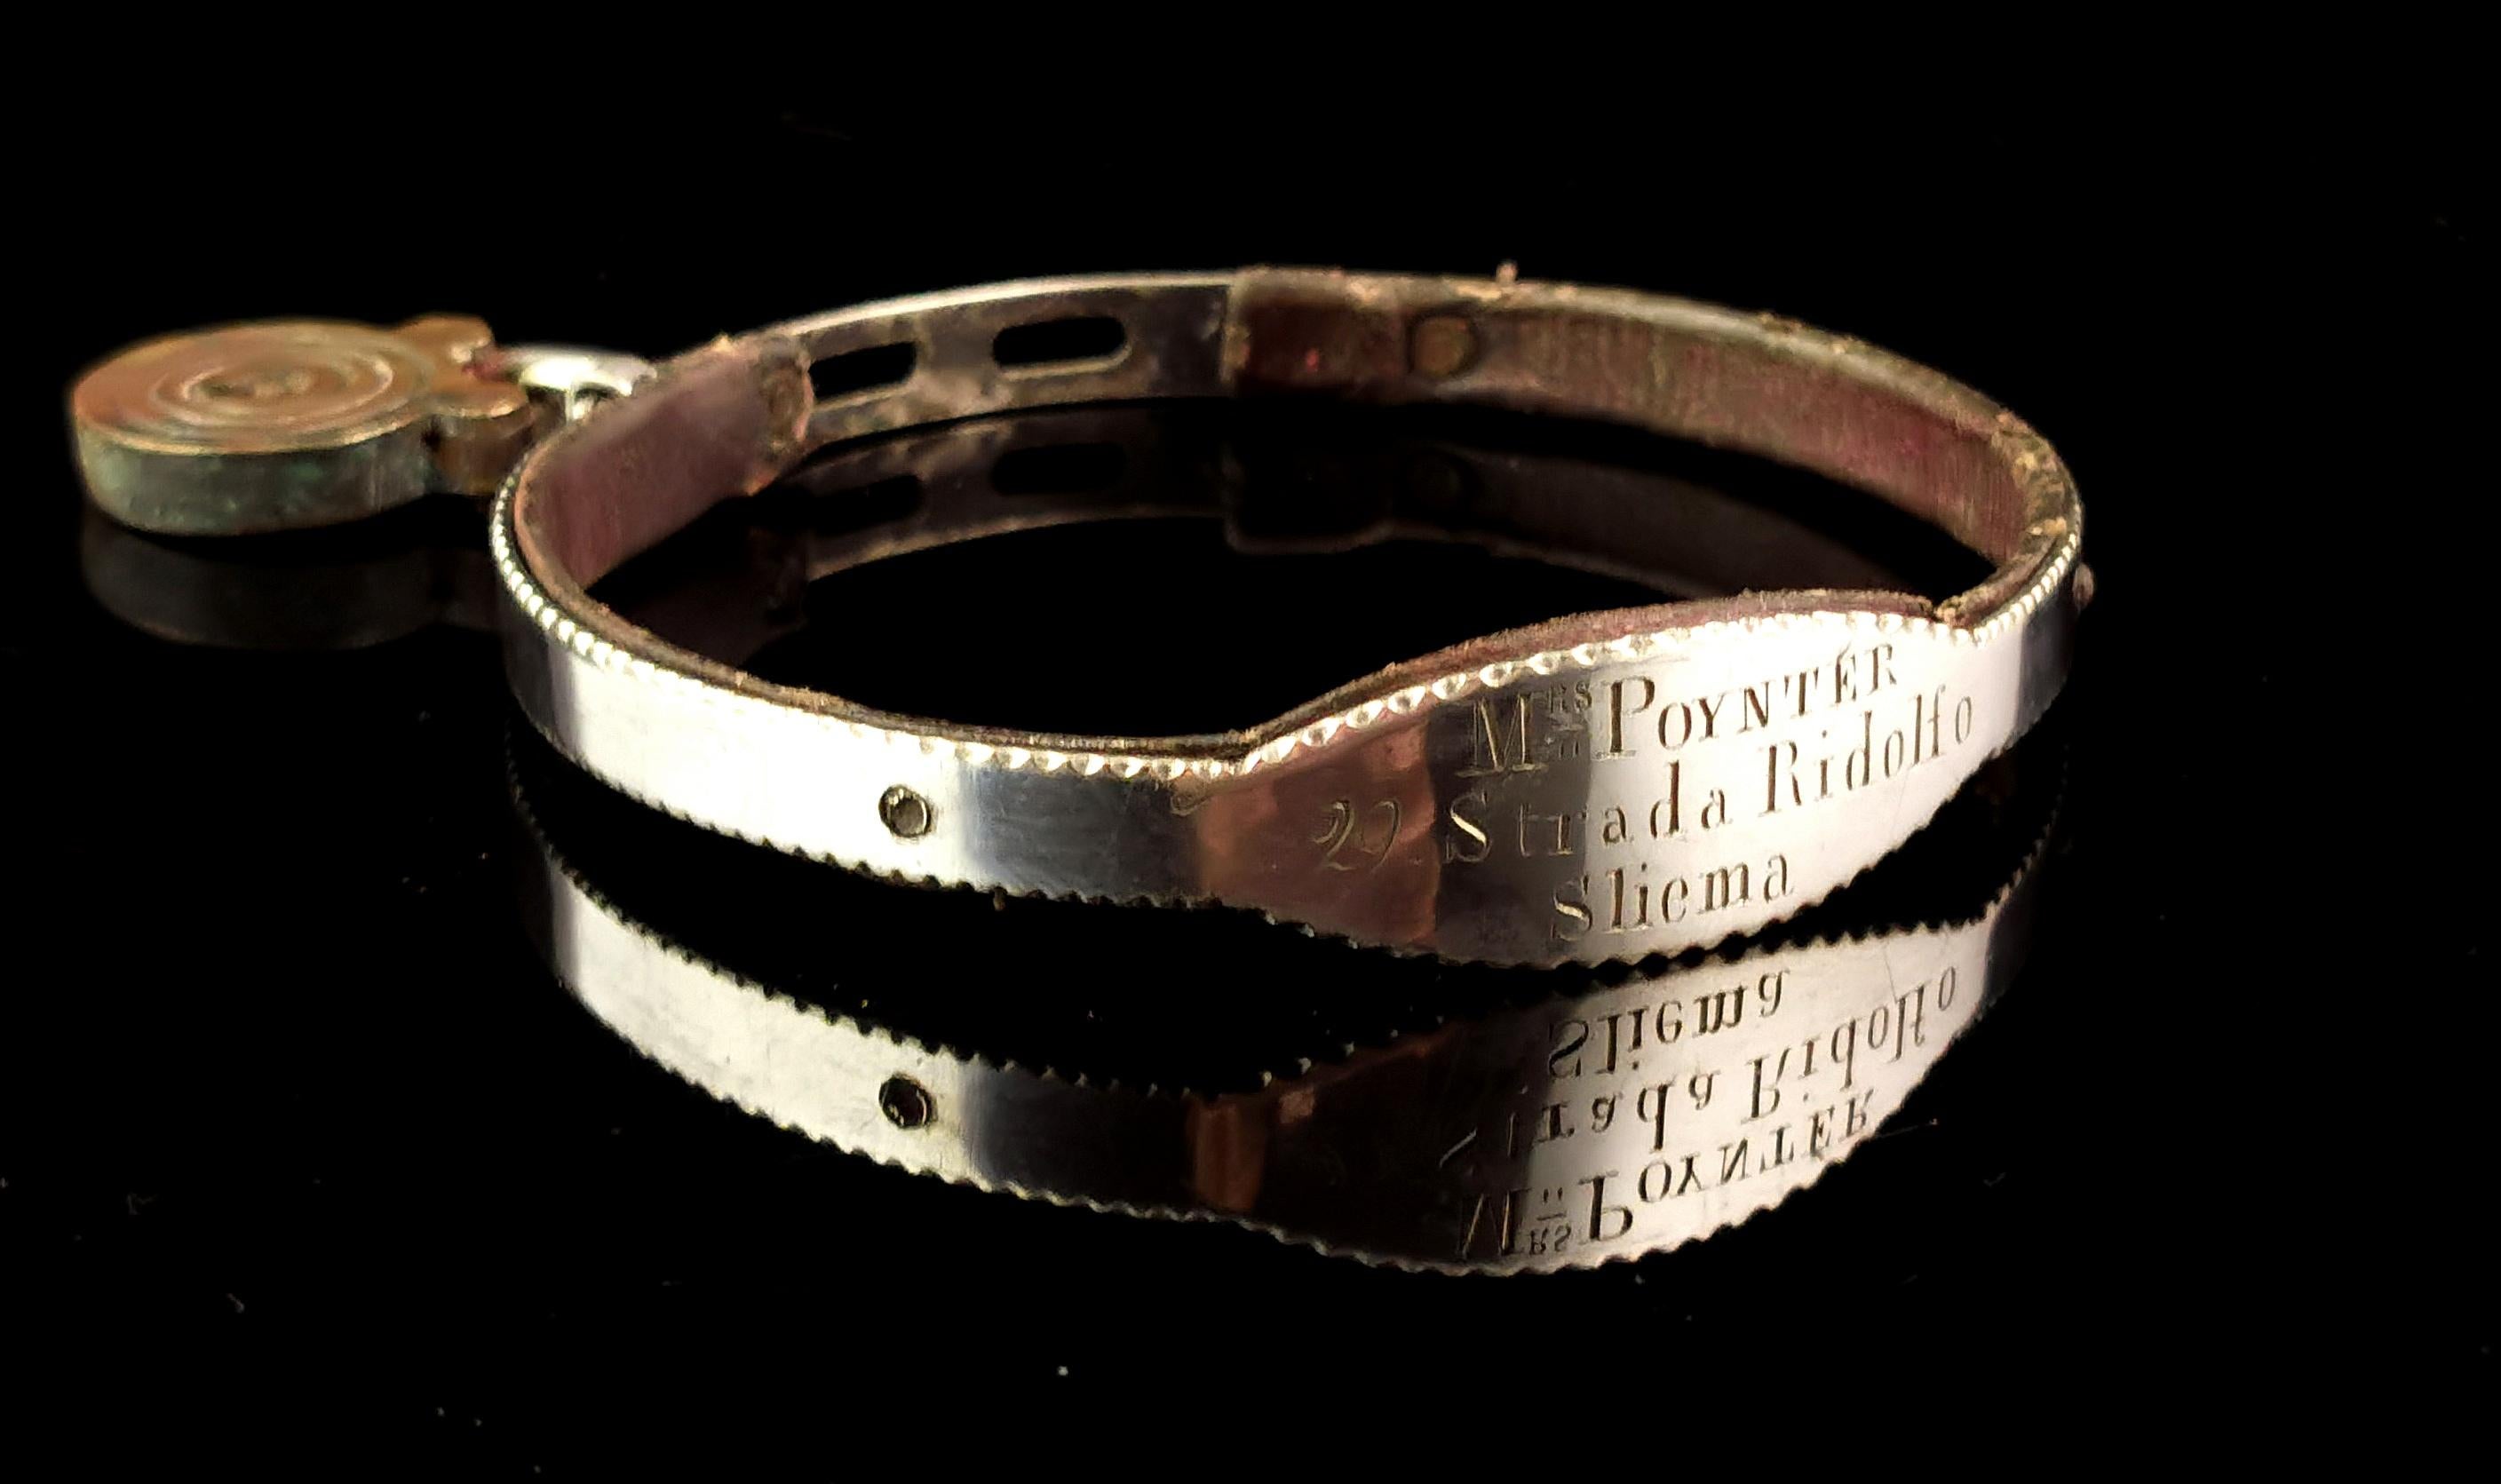 A beautiful antique silver and leather dog collar.

A prized possession for a beloved pet, this collar has a band of silver mounted onto a leather collar, the front engraved with; Mrs Poynter, 22 Strada Ridolfo, Sliema.

This is an address in Malta